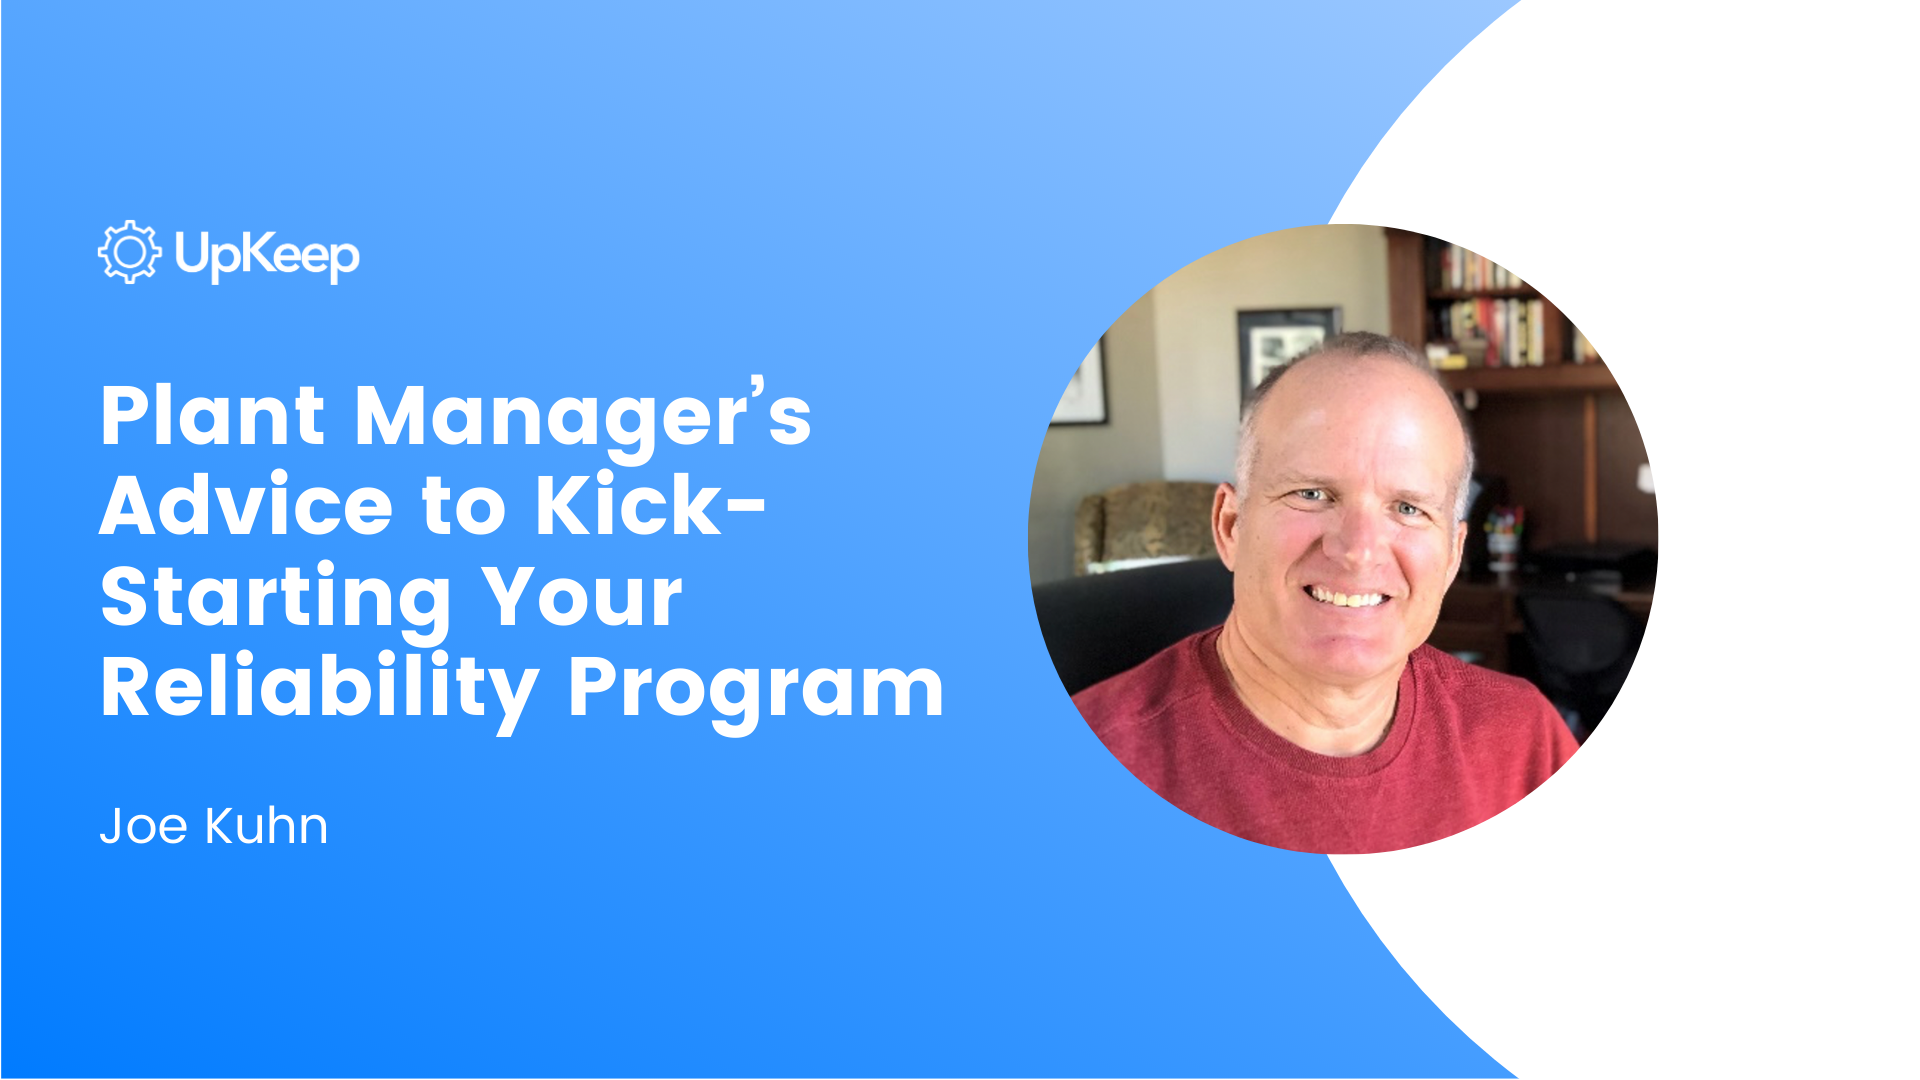 A Plant Manager’s Advice to Kick-Starting Your Reliability Program